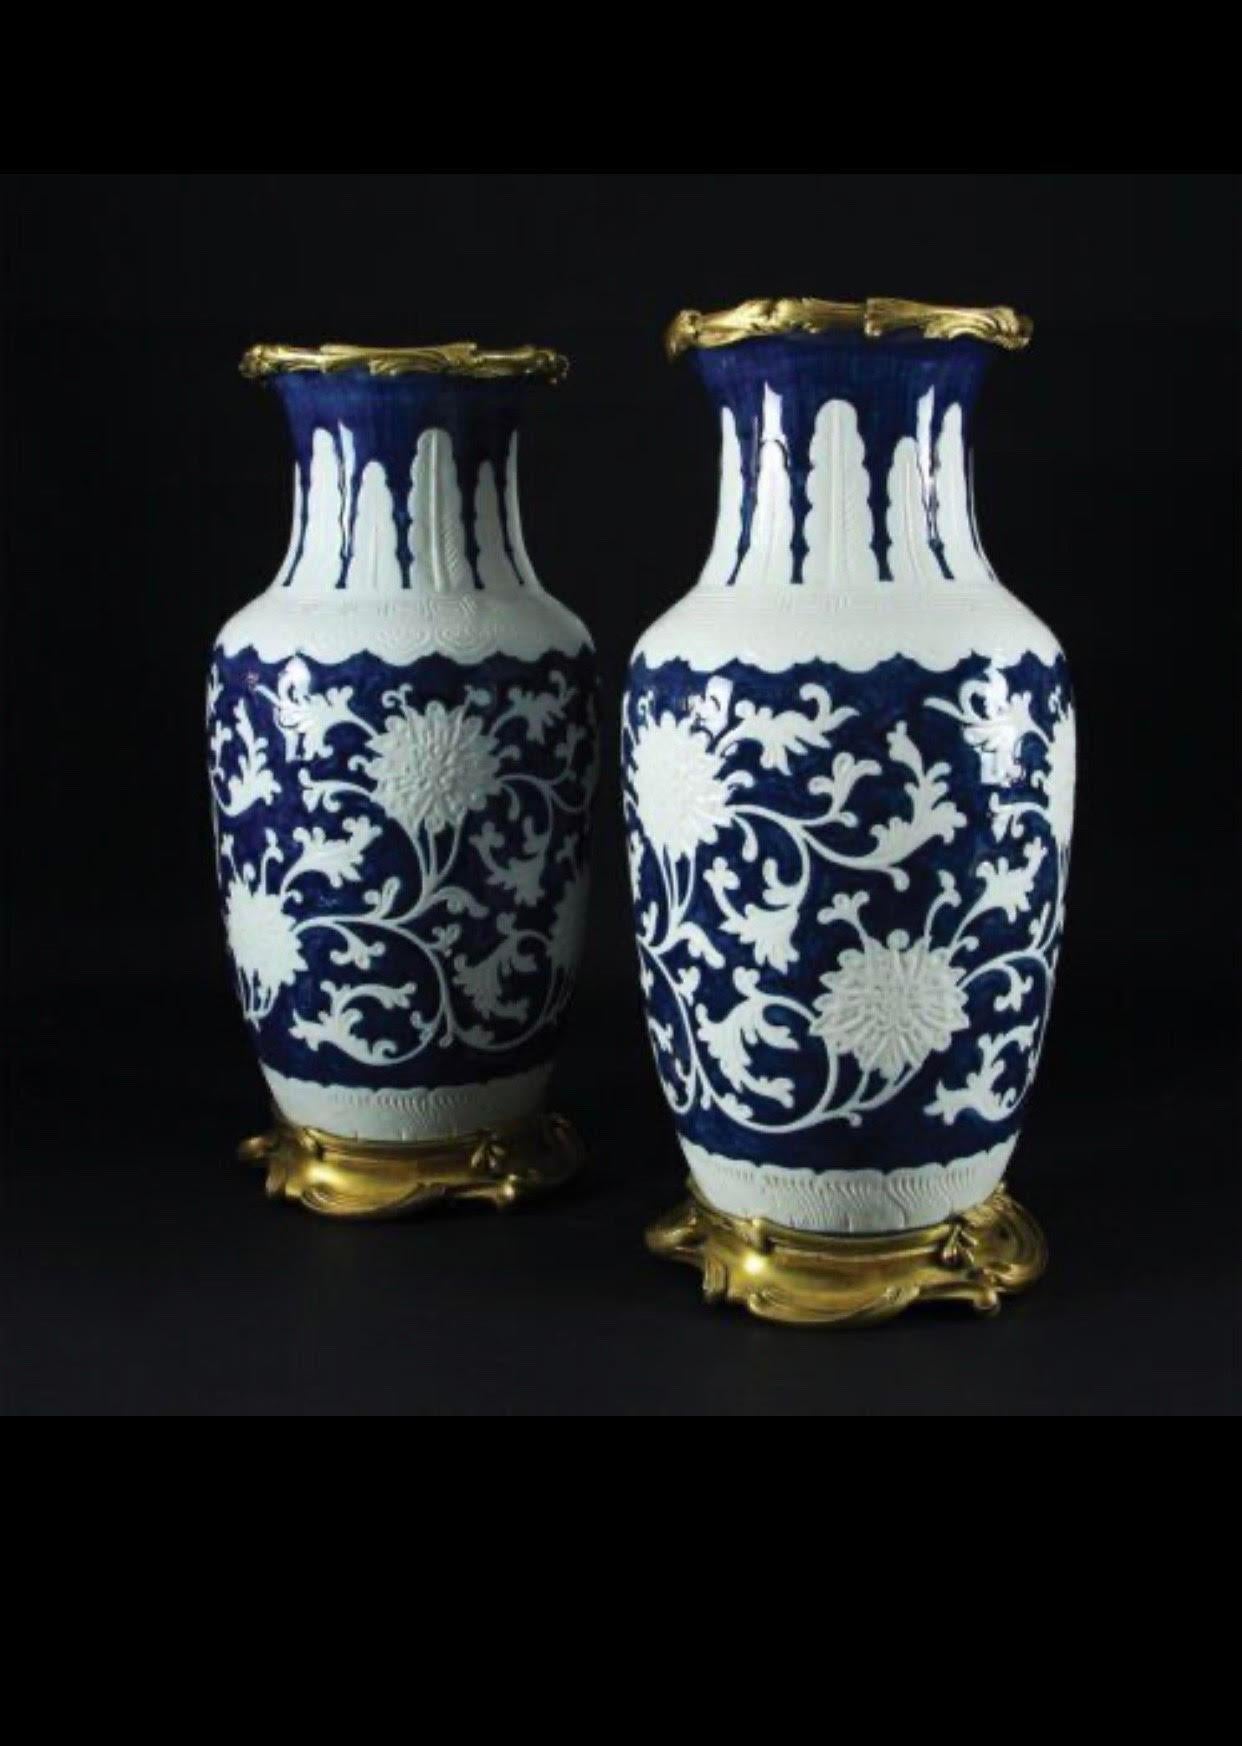 Elegant pair of blue and white porcelain vases finely decorated with floral motifs; gilt bronze frame and chiseled with volutes. China, 19th Century. Dimensions 48x19x19cm.